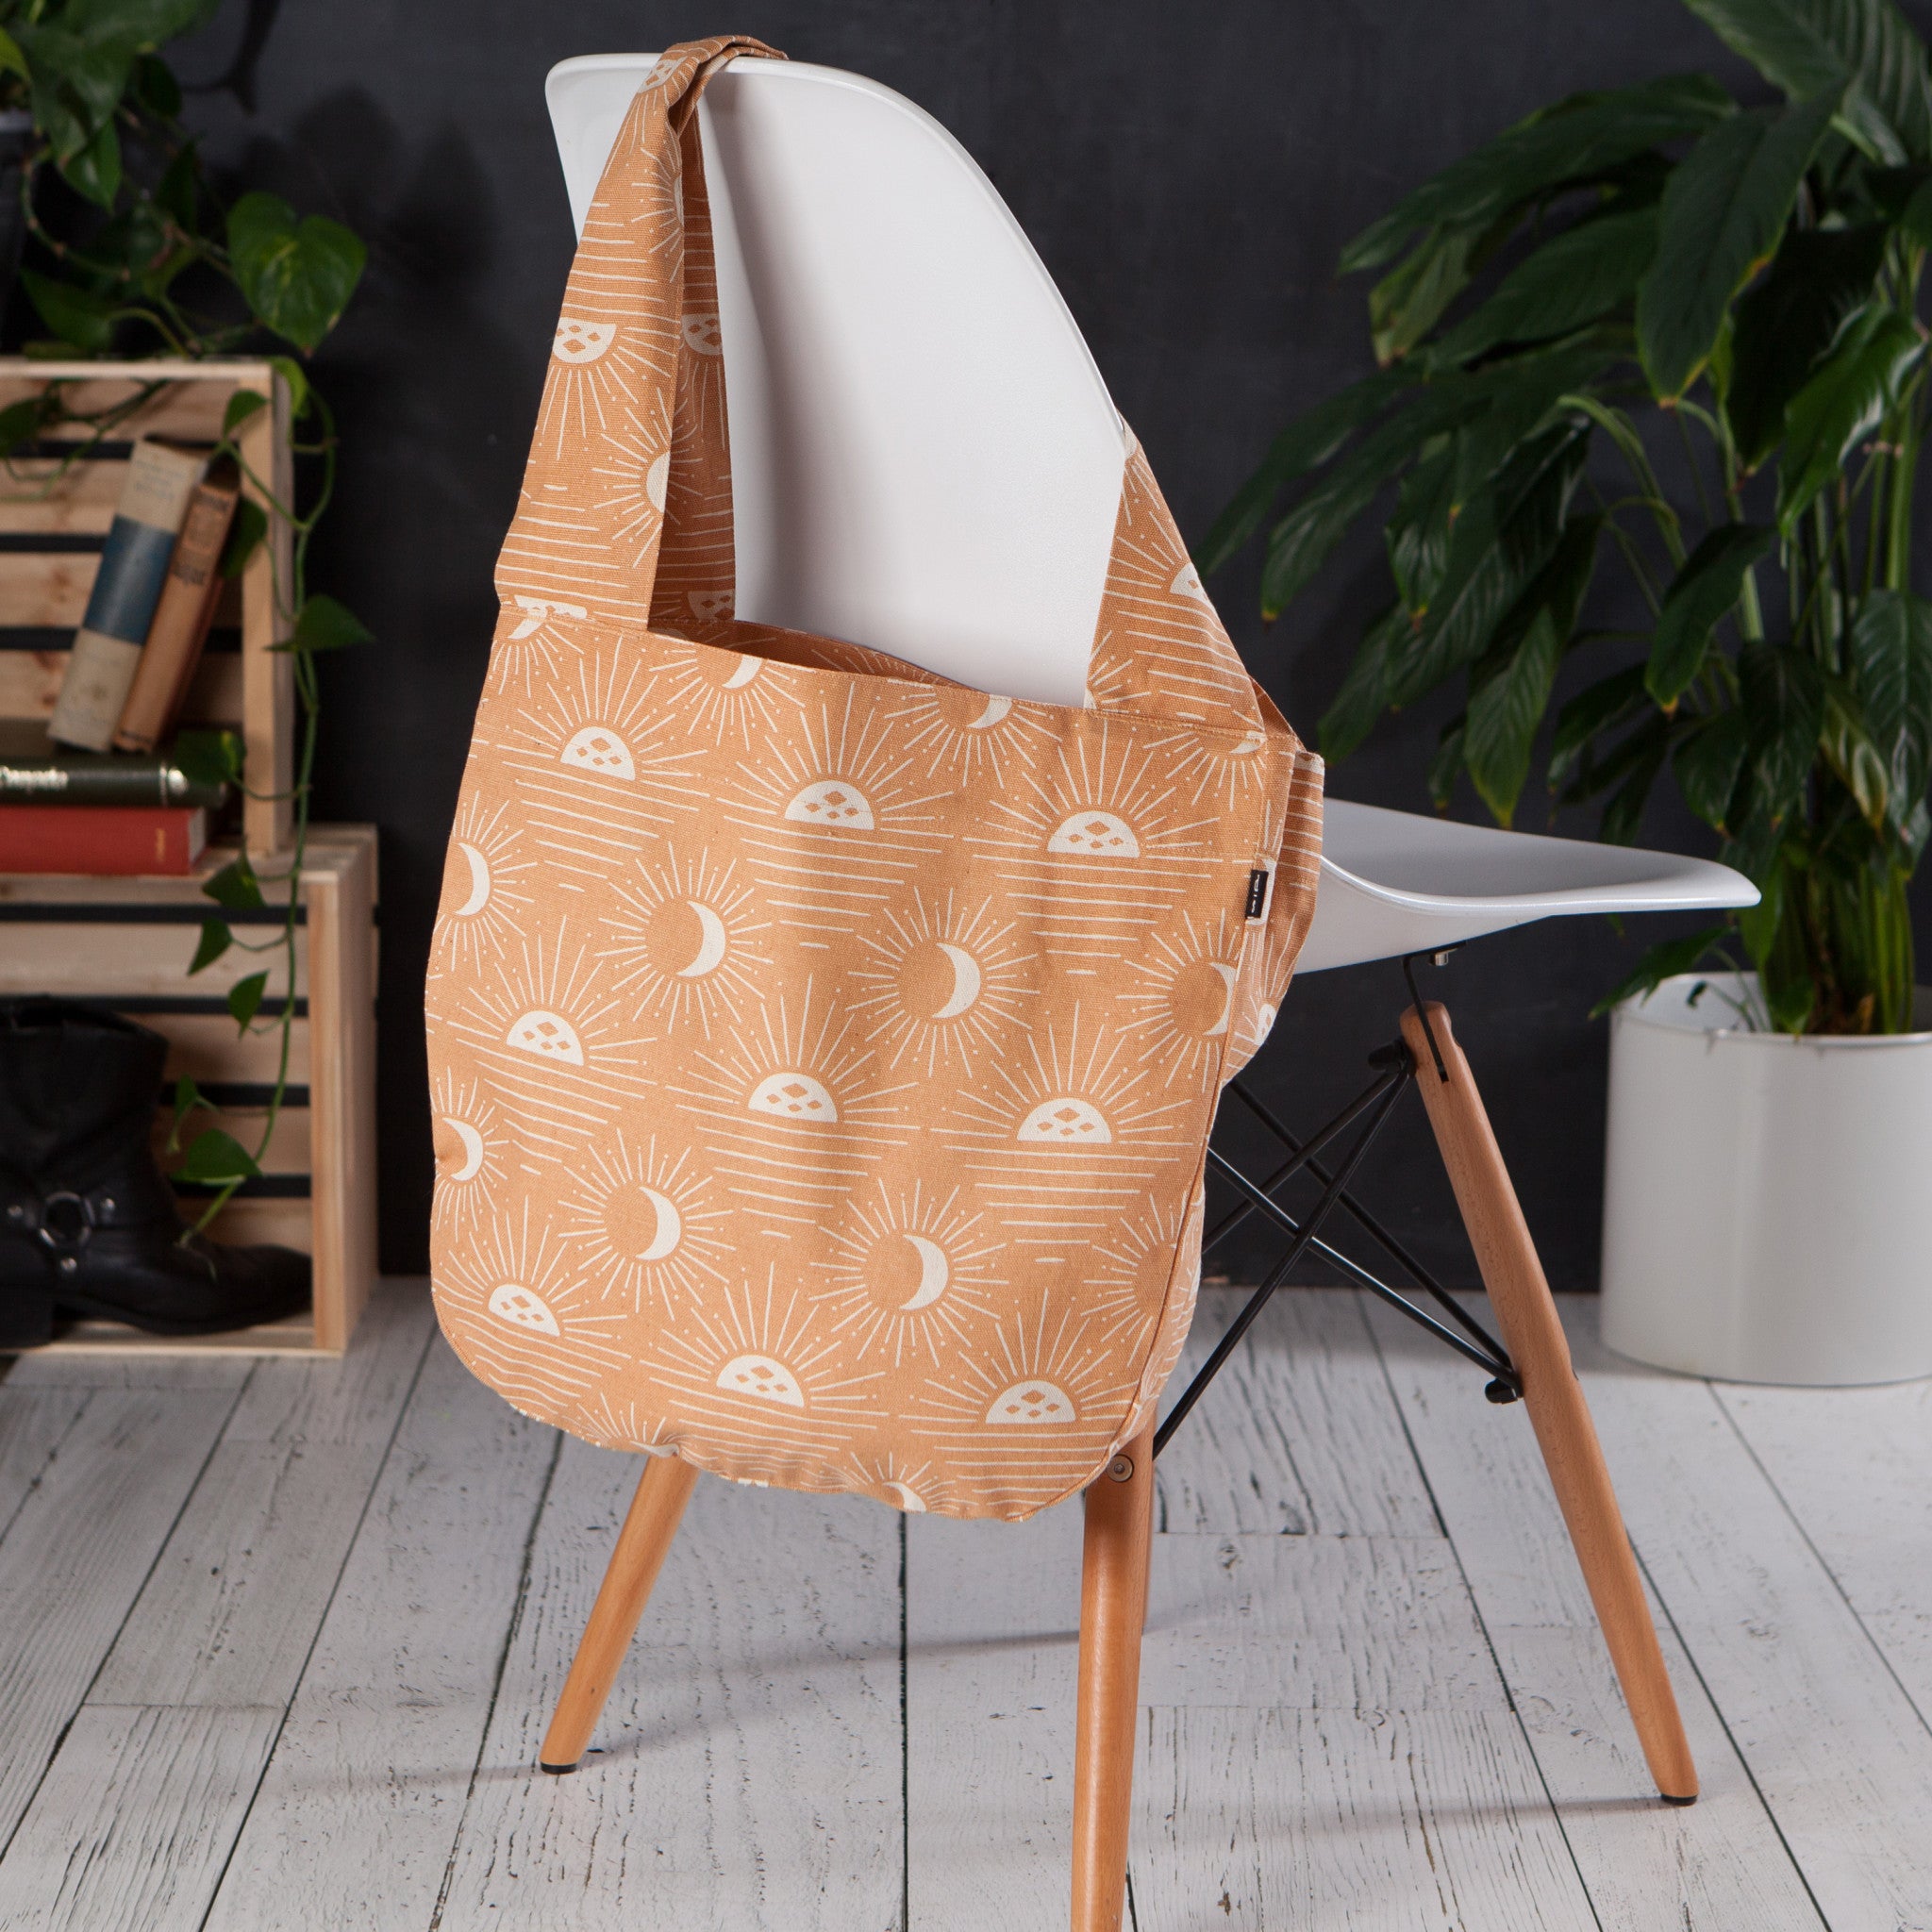 Soleil To and Fro Tote Bag